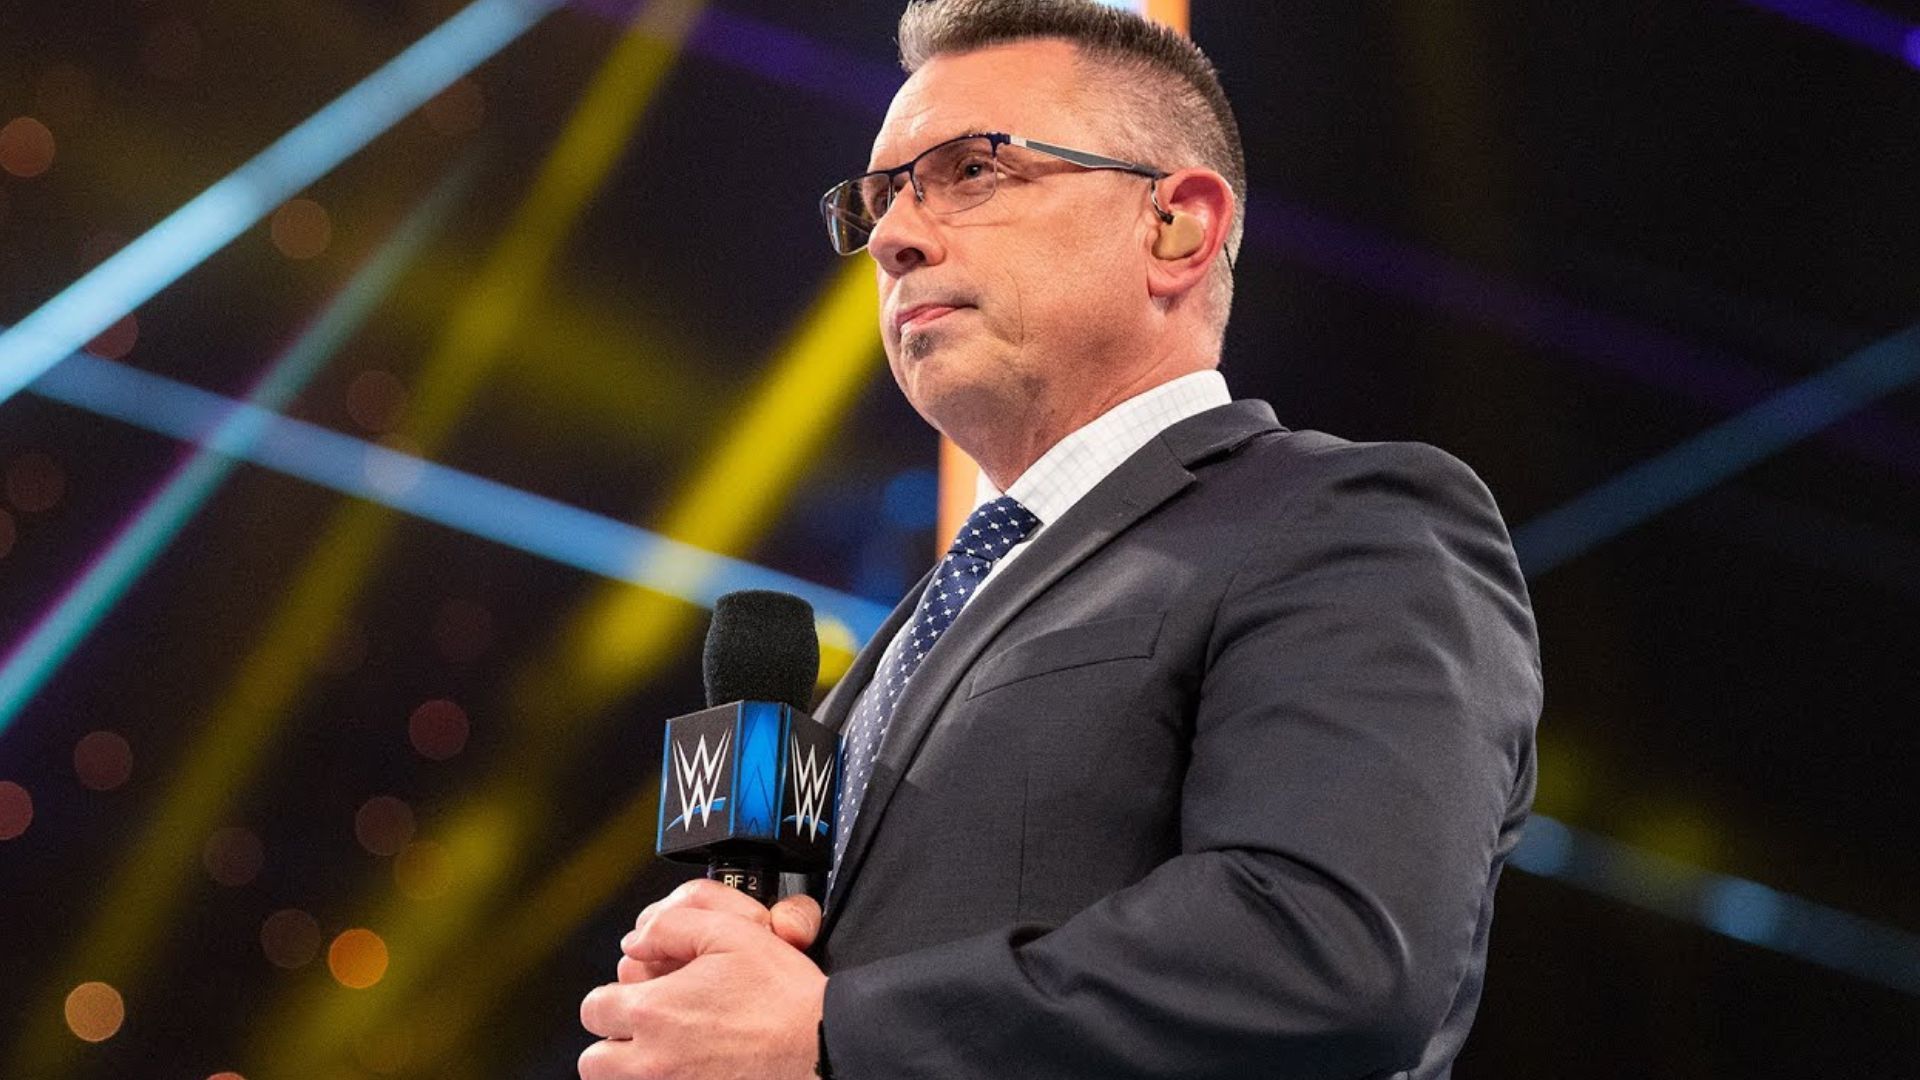 Michael Cole is an underrated commentator